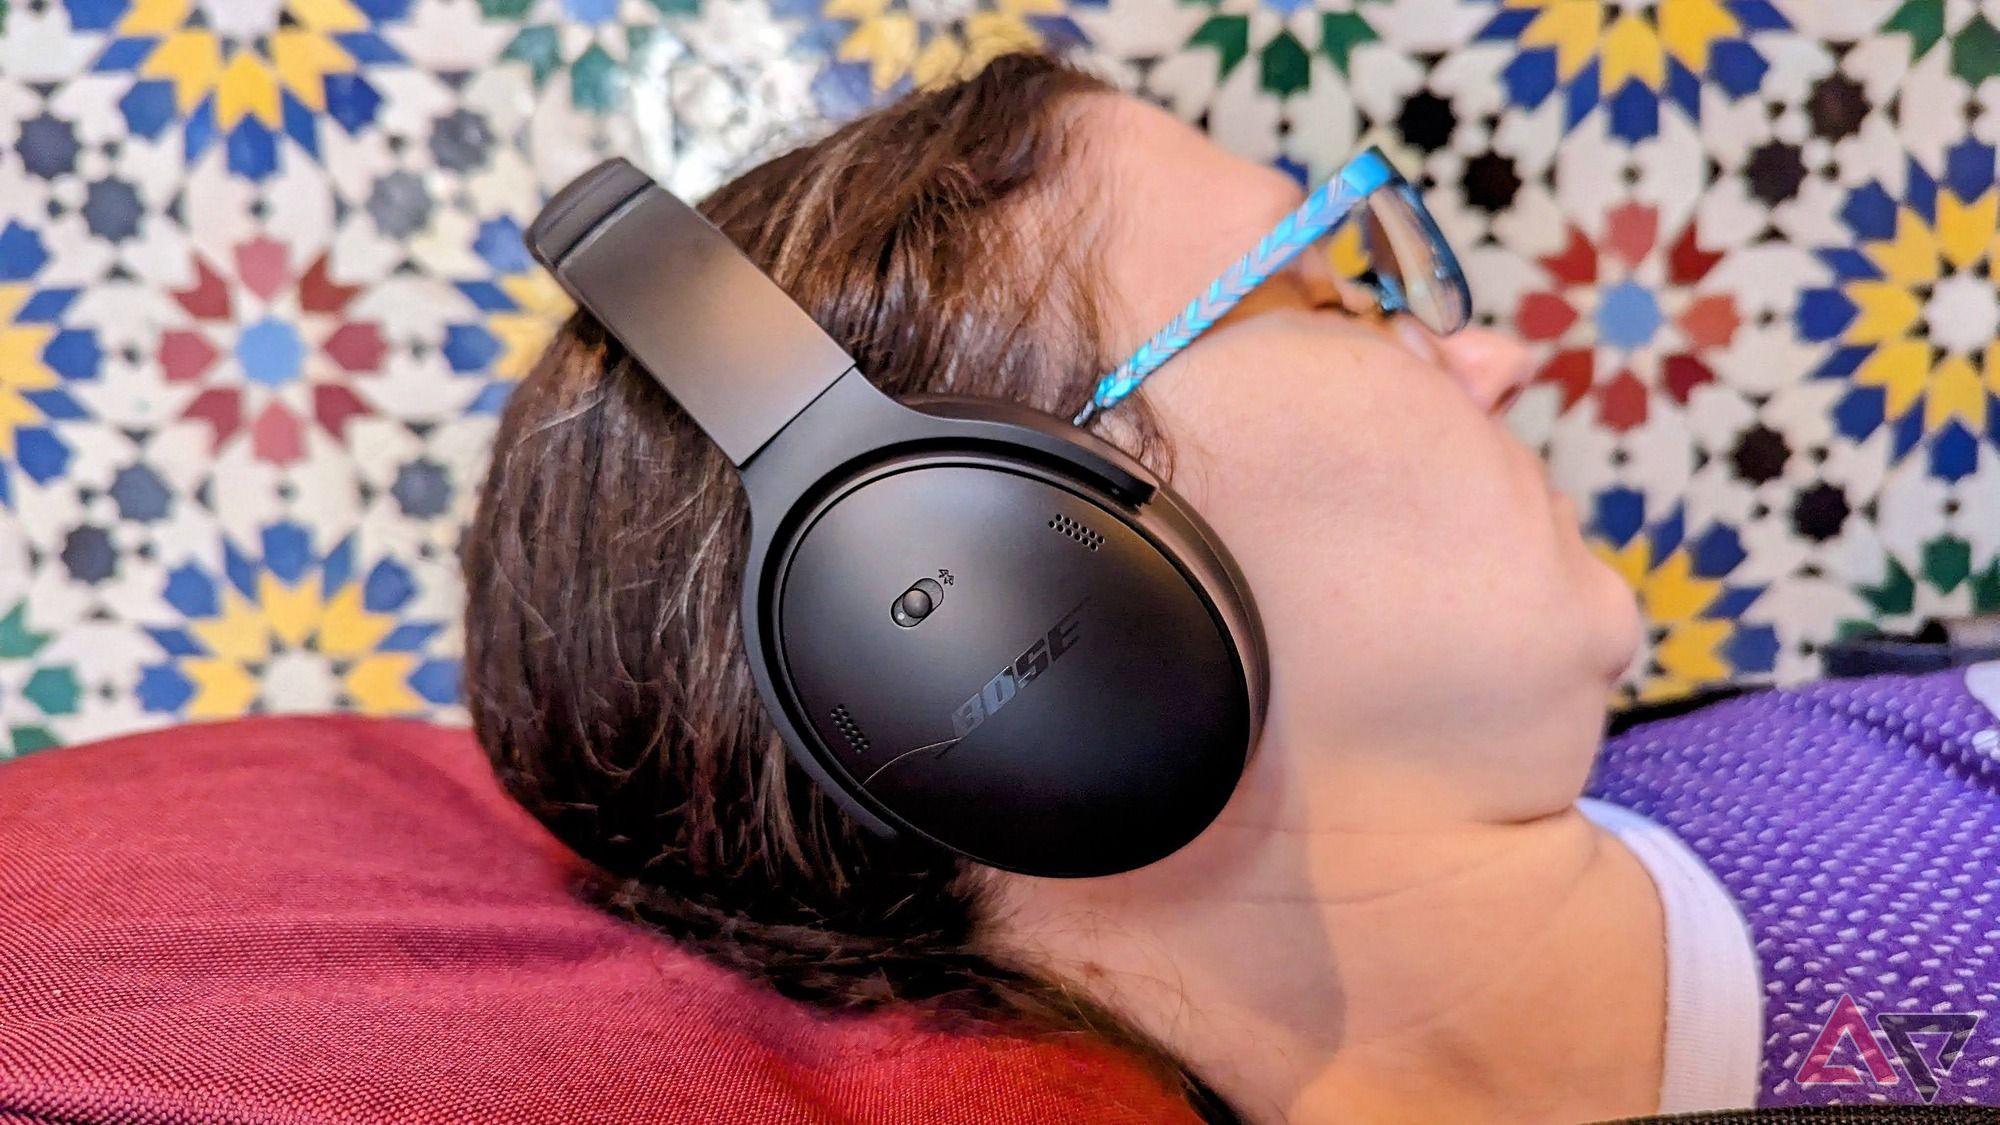 Bose QuietComfort Headphones review: Second verse, same as the first